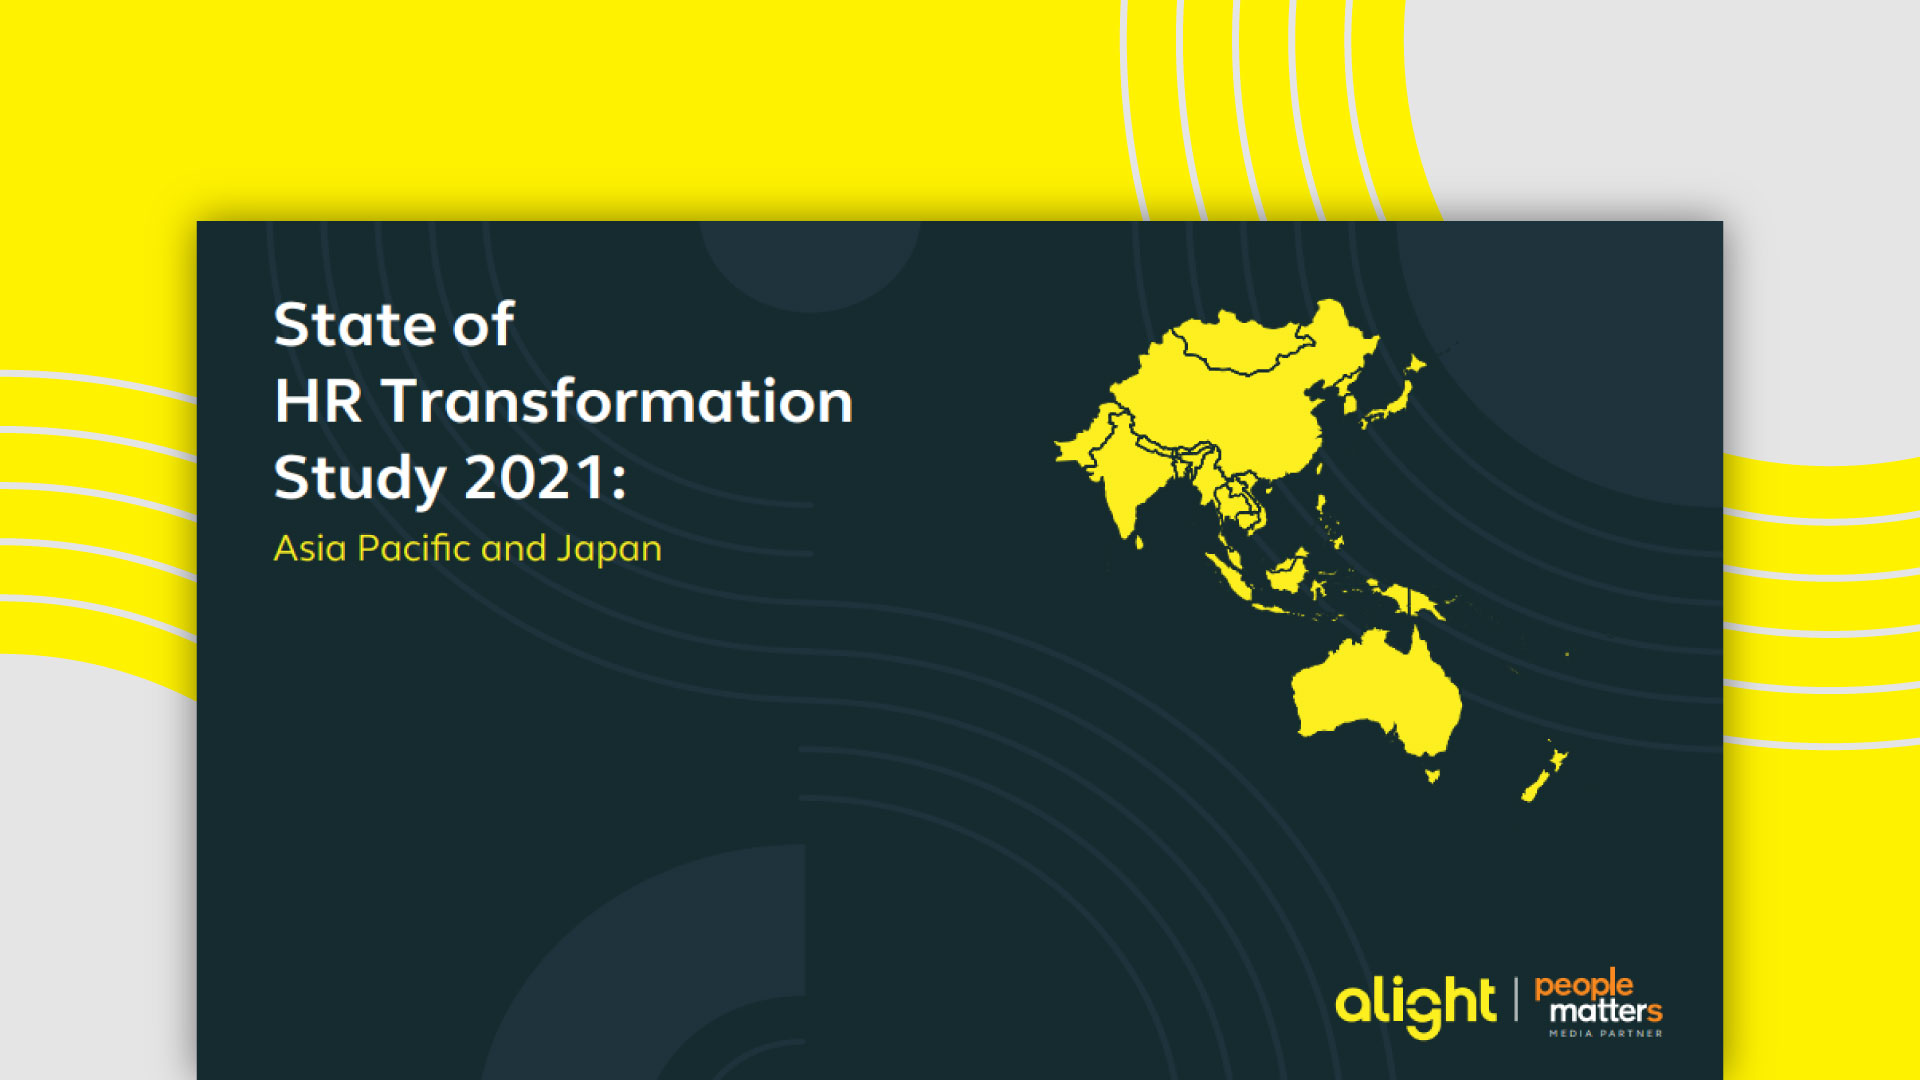 State of HR Transformation Study 2021 in Australia and Japan